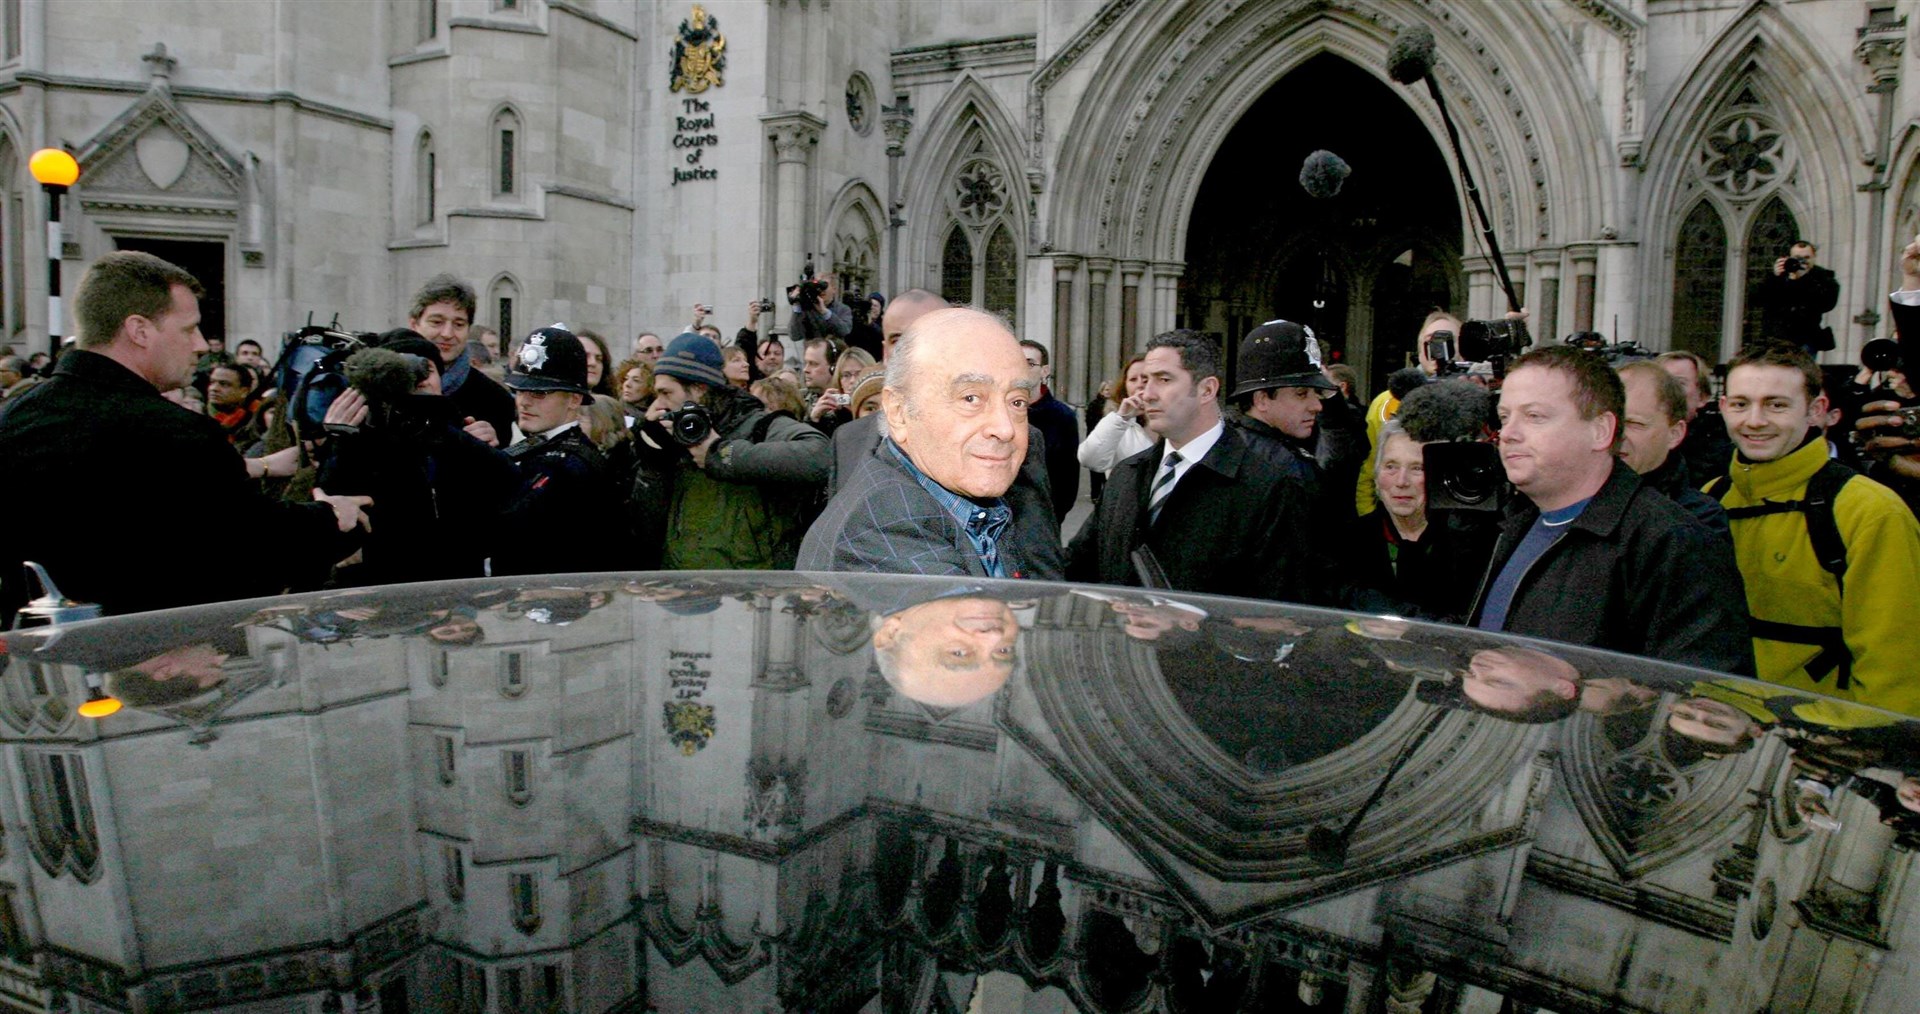 Mohamed Al Fayed leaving the High Court in London, after giving evidence at the inquest into the death of his son, Dodi, and Diana, Princess of Wales (PA)